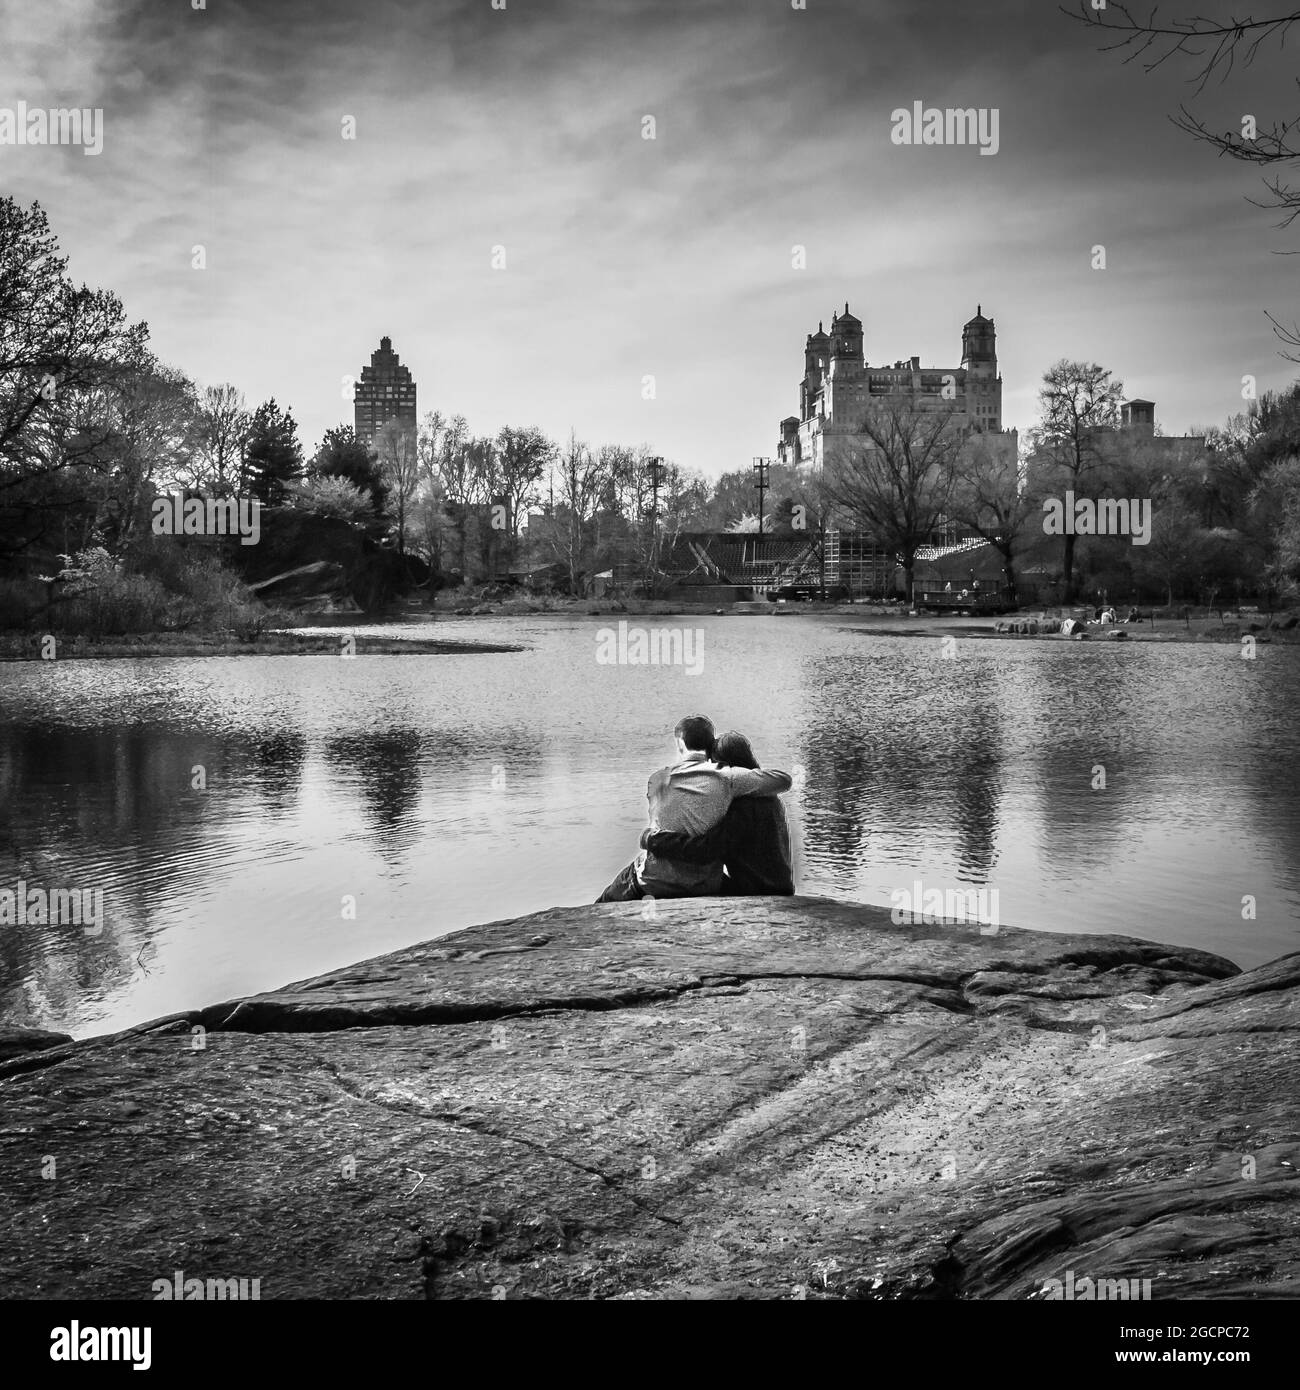 Couple embracing beside the Turtle Pond in Central Park, New York City, NY, USA Stock Photo